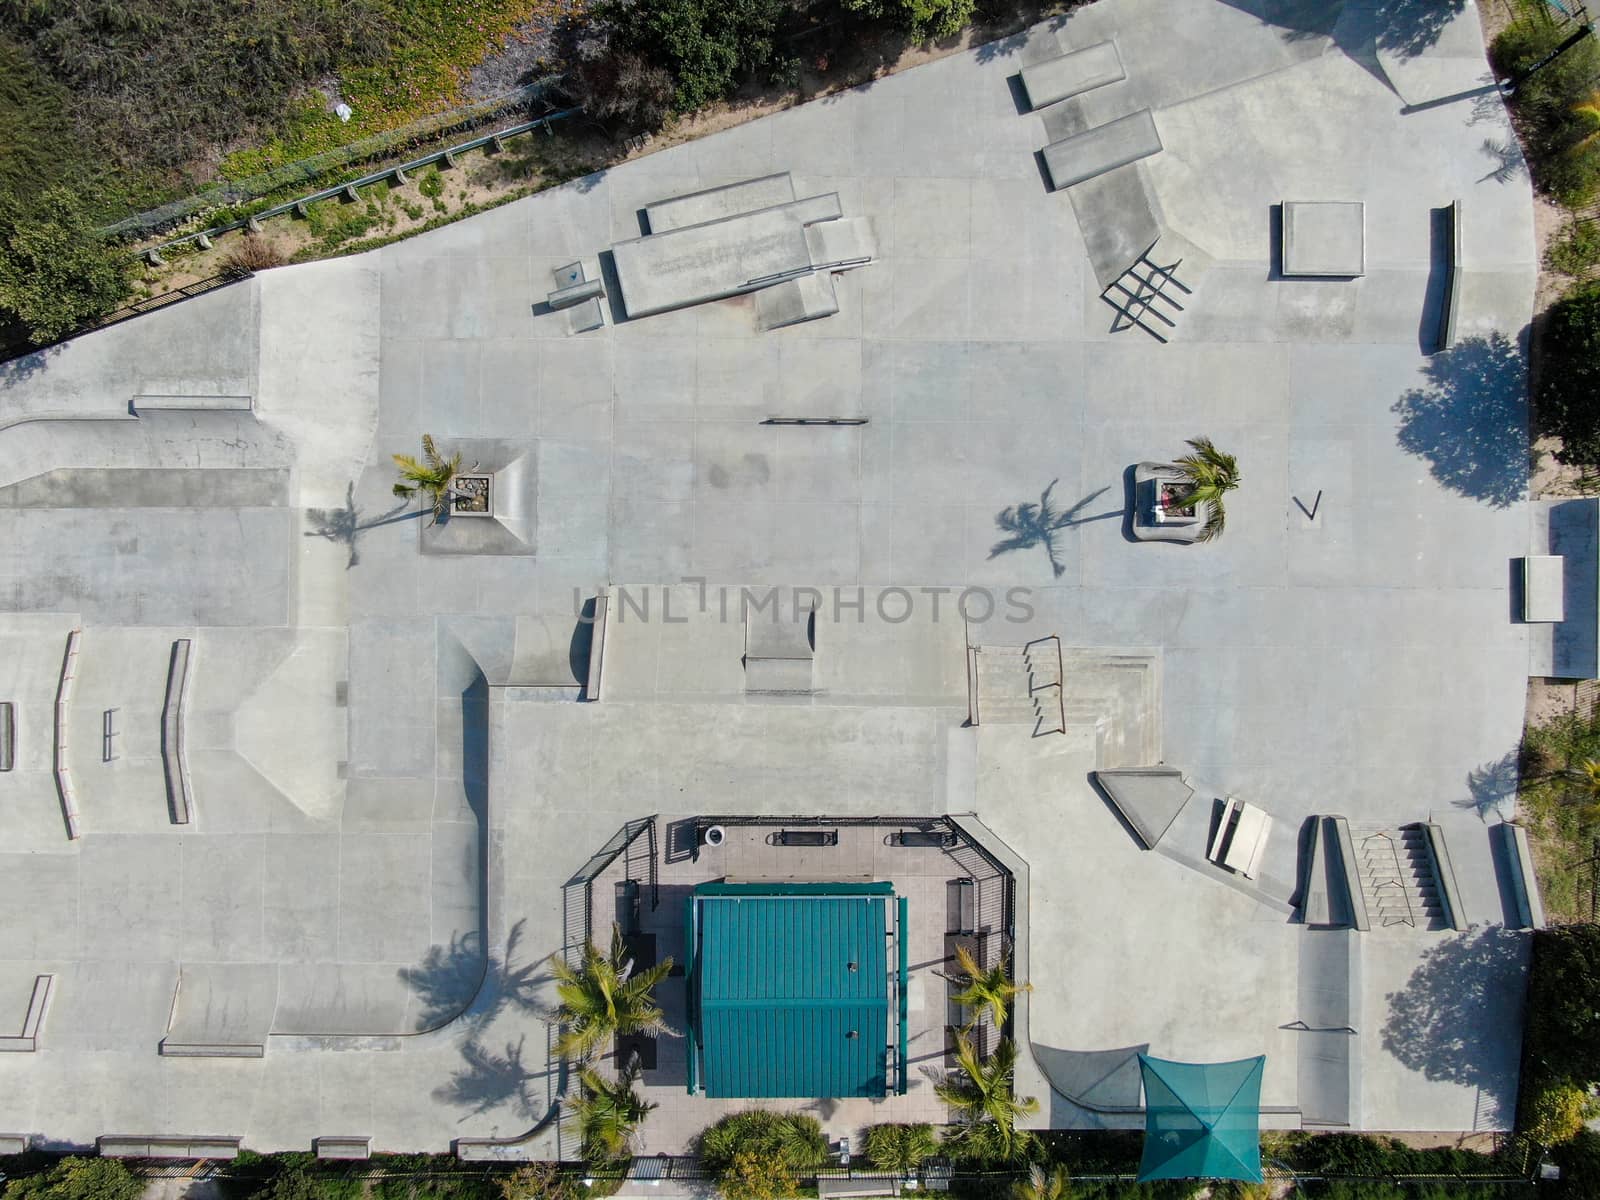 Aerial view of outdoor empty concrete skate park with ramps and pipes in California. USA